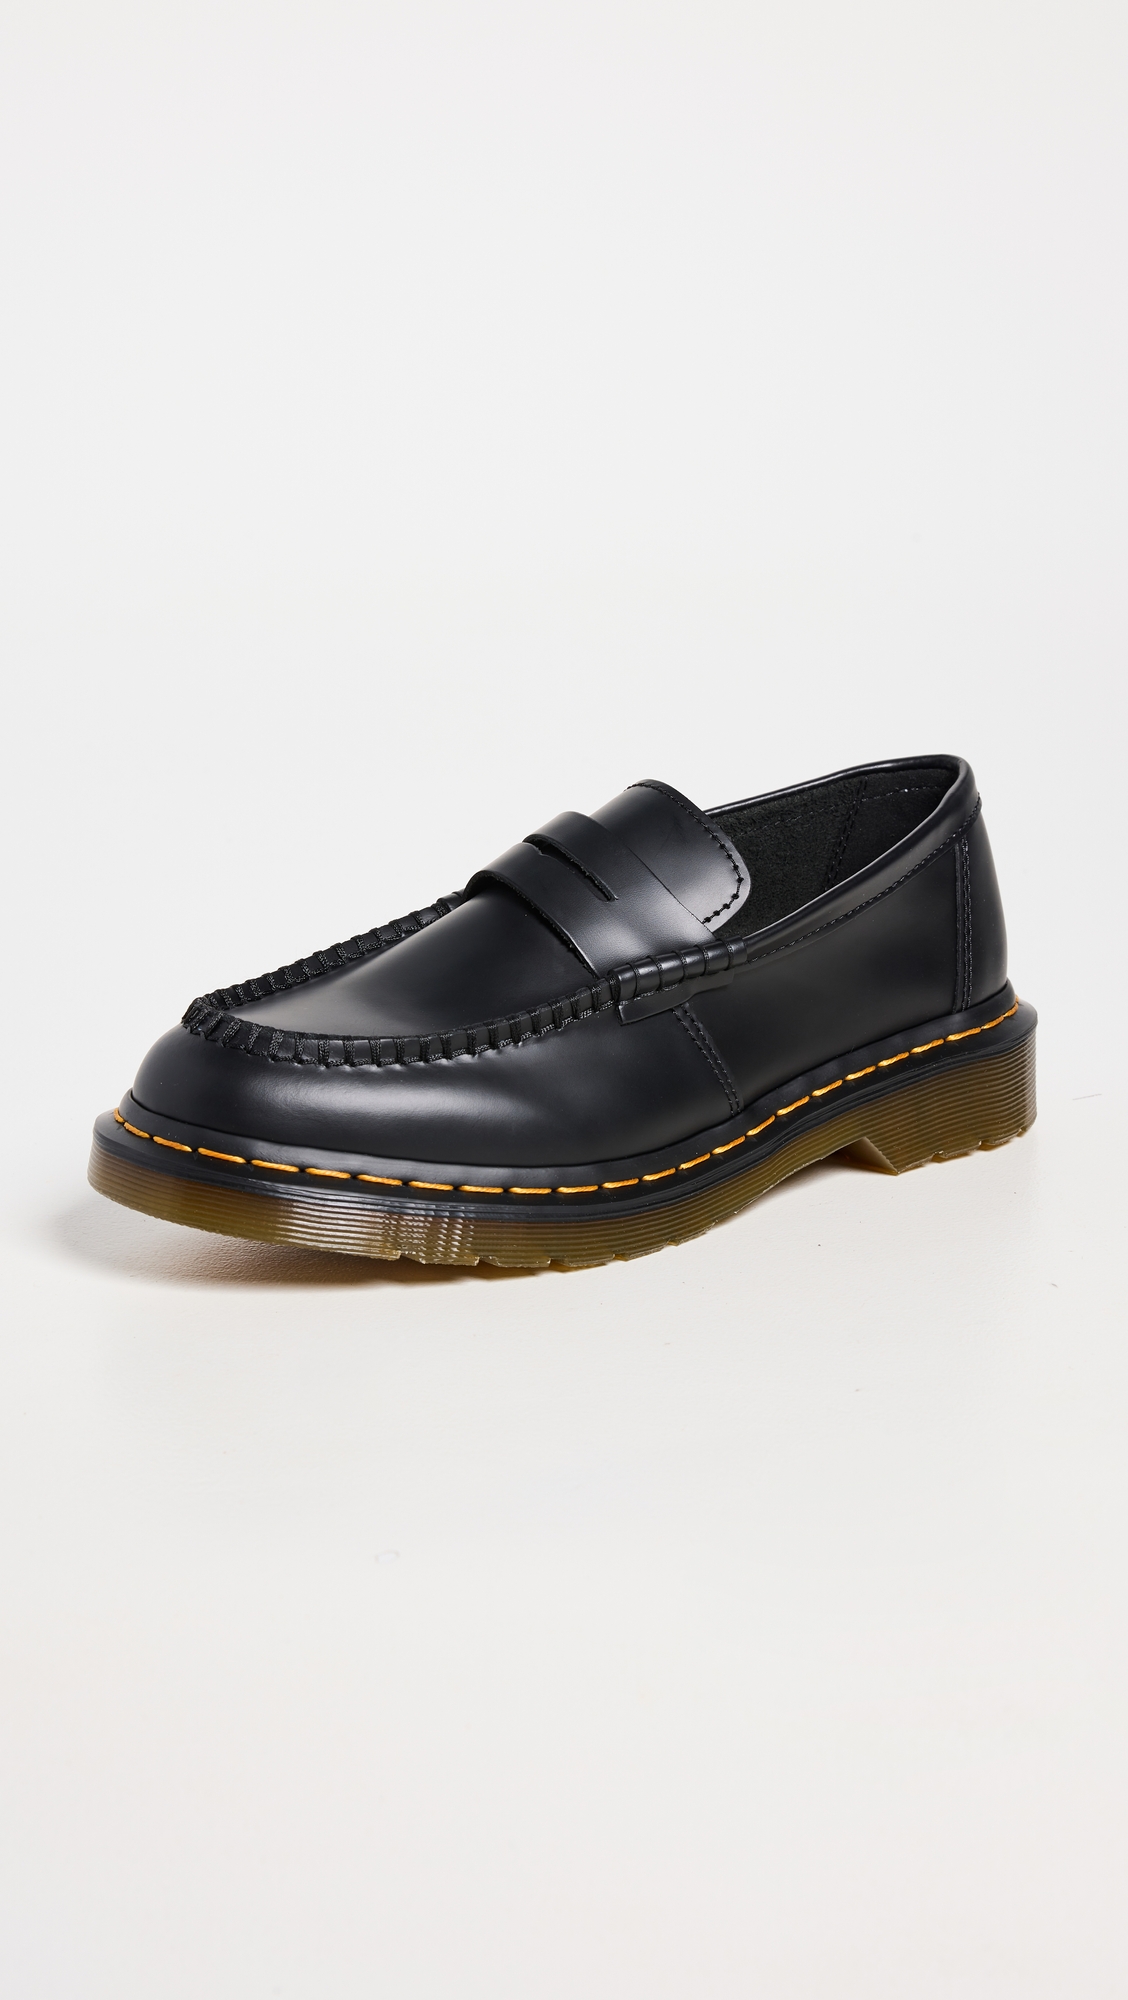 black leather loafers with brown soles